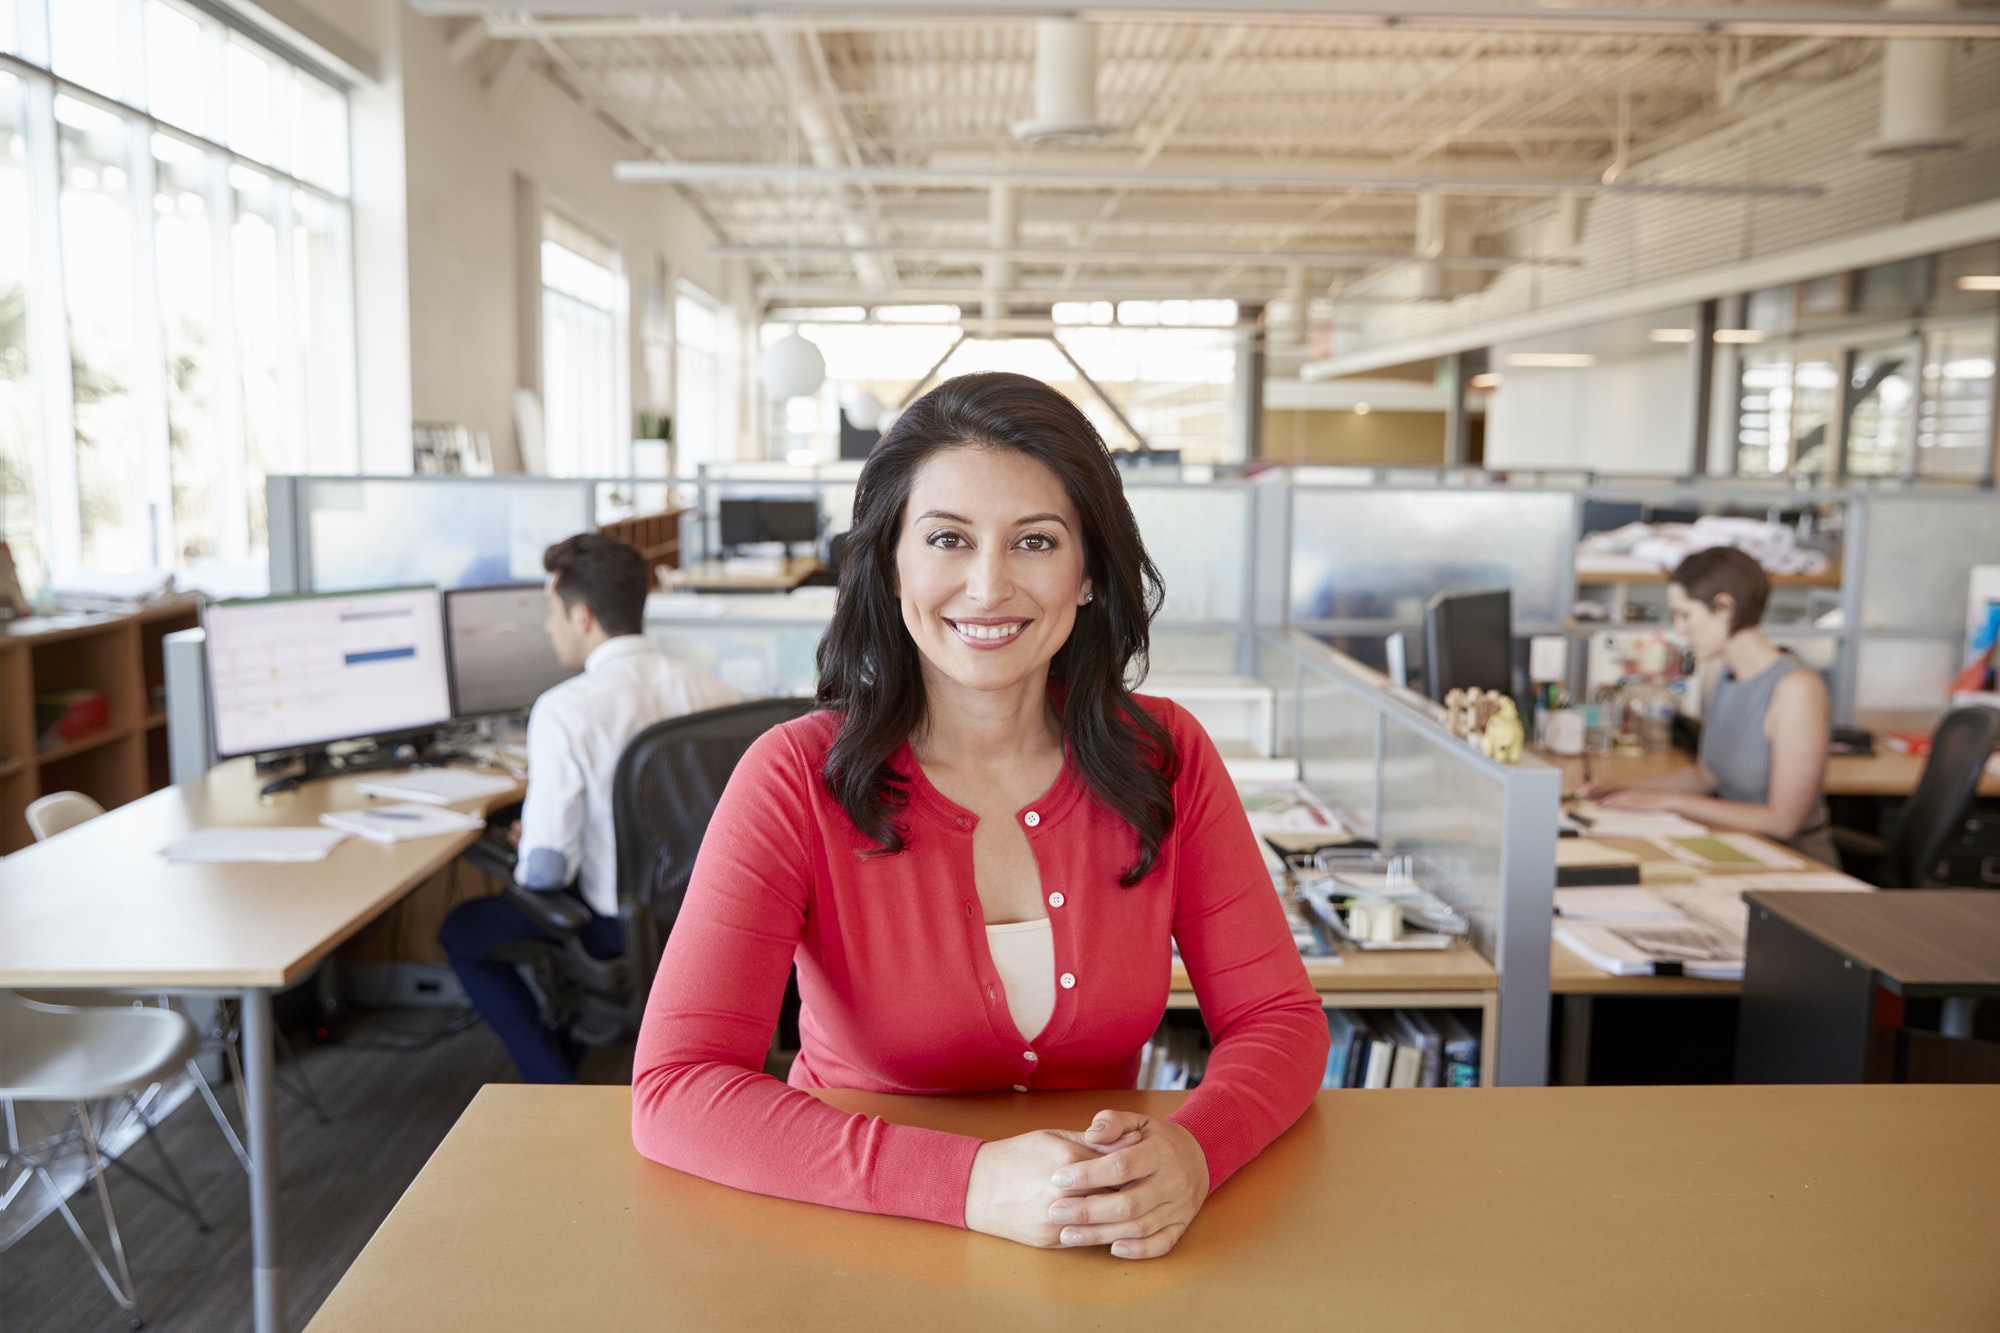 Smiling female architect at a desk in busy open plan office